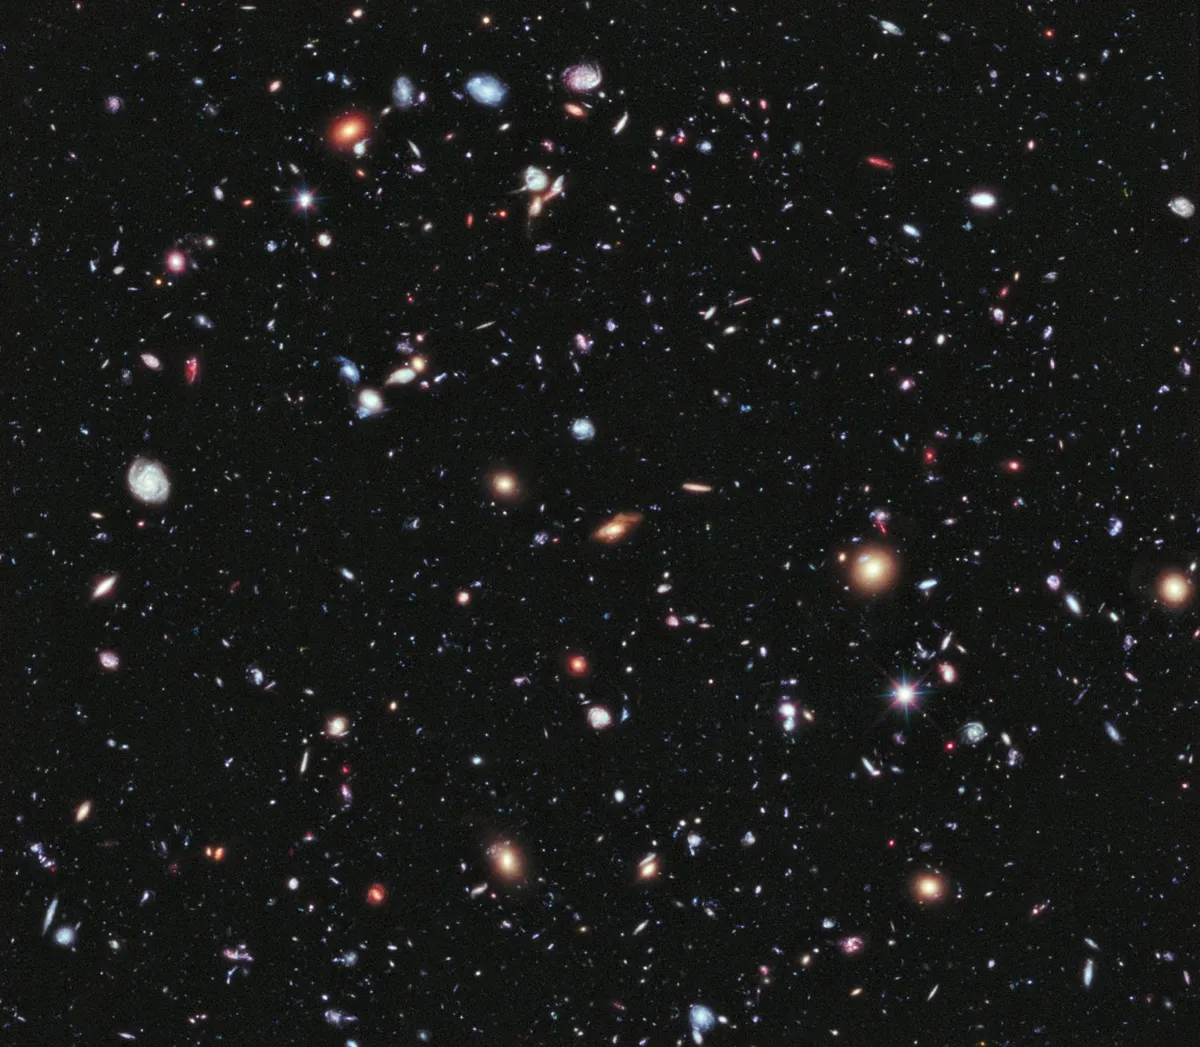 The Hubble eXtreme Deep Field (XDF) was created by using 10 years of Hubble Space Telescope images and reveals galaxies spanning 13.2 billion years in time: about 0.6 years after the birth of the Universe. The deep field captures such distant light, most of the galaxies are seen as they existed in their infancy. Credit: NASA,ESA, G. Illingworth, D. Magee, and P. Oesch (University of California, Santa Cruz), R. Bouwens (Leiden University), and the HUDF09 Team